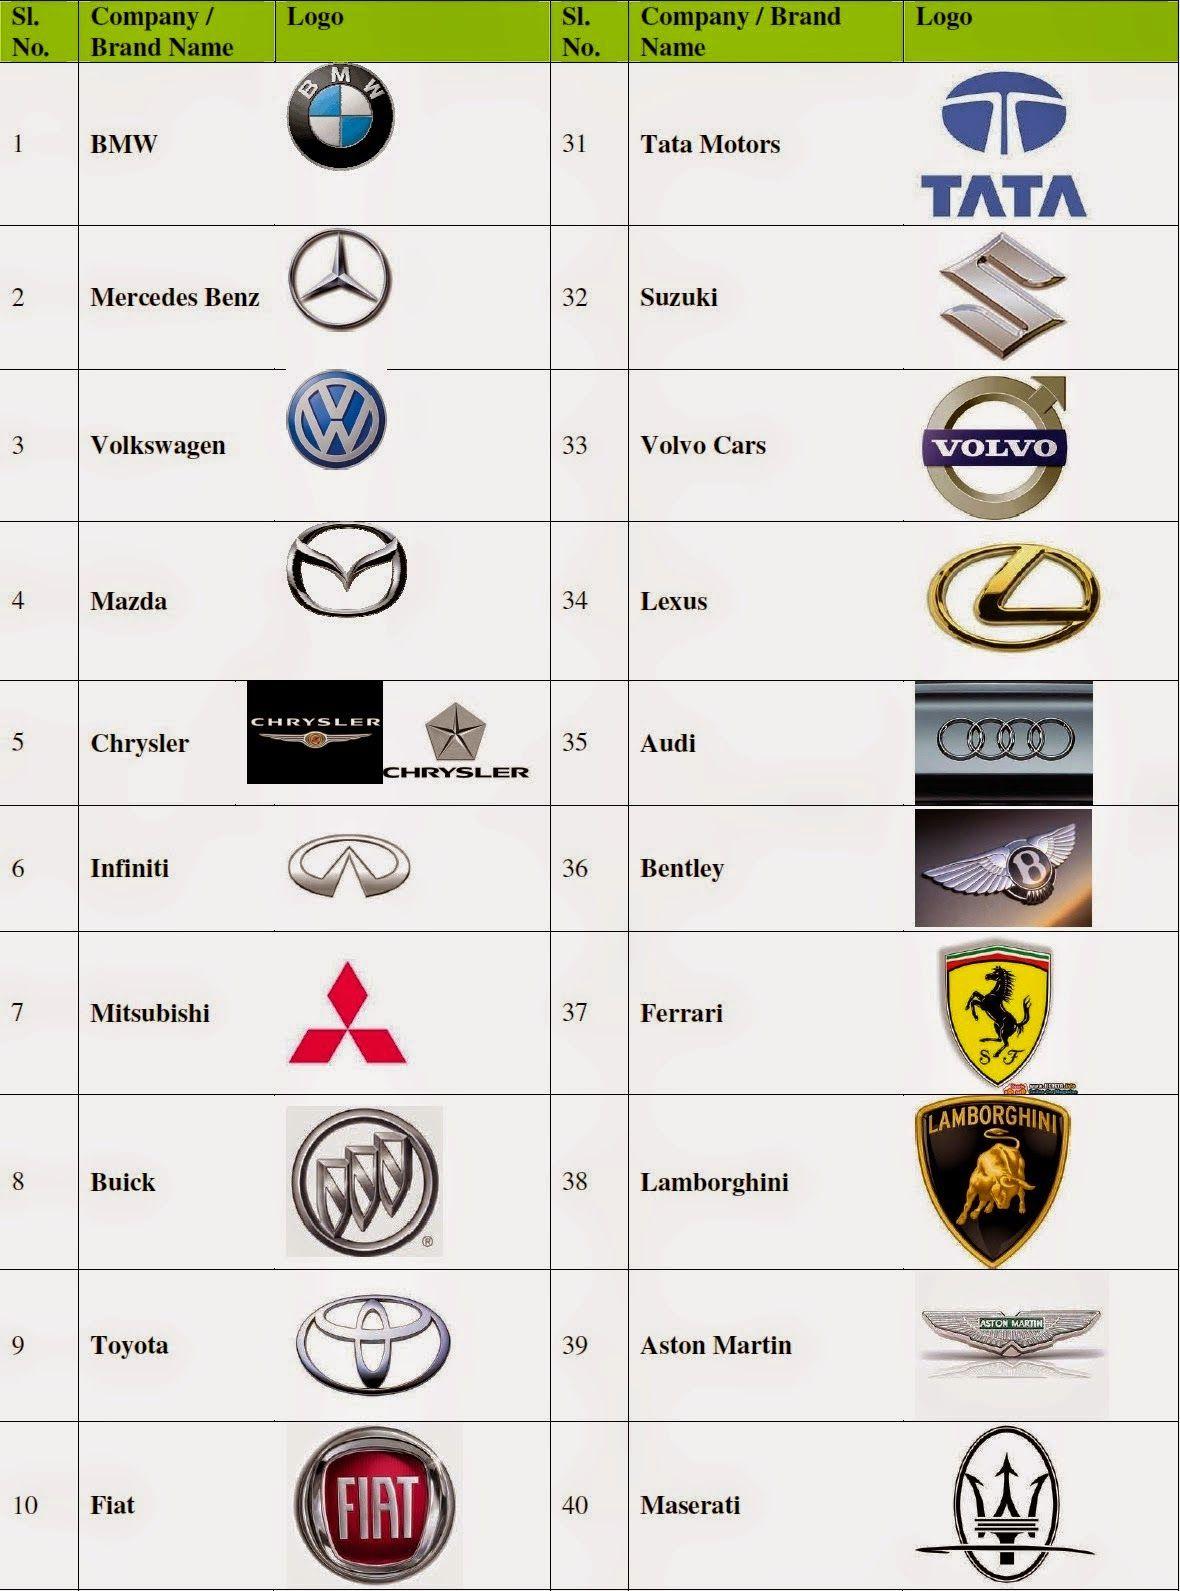 Leading Car Part Manufacturer Logo - Best Cars Brands and Car Companies: Car Brand Logos of Leading Car ...